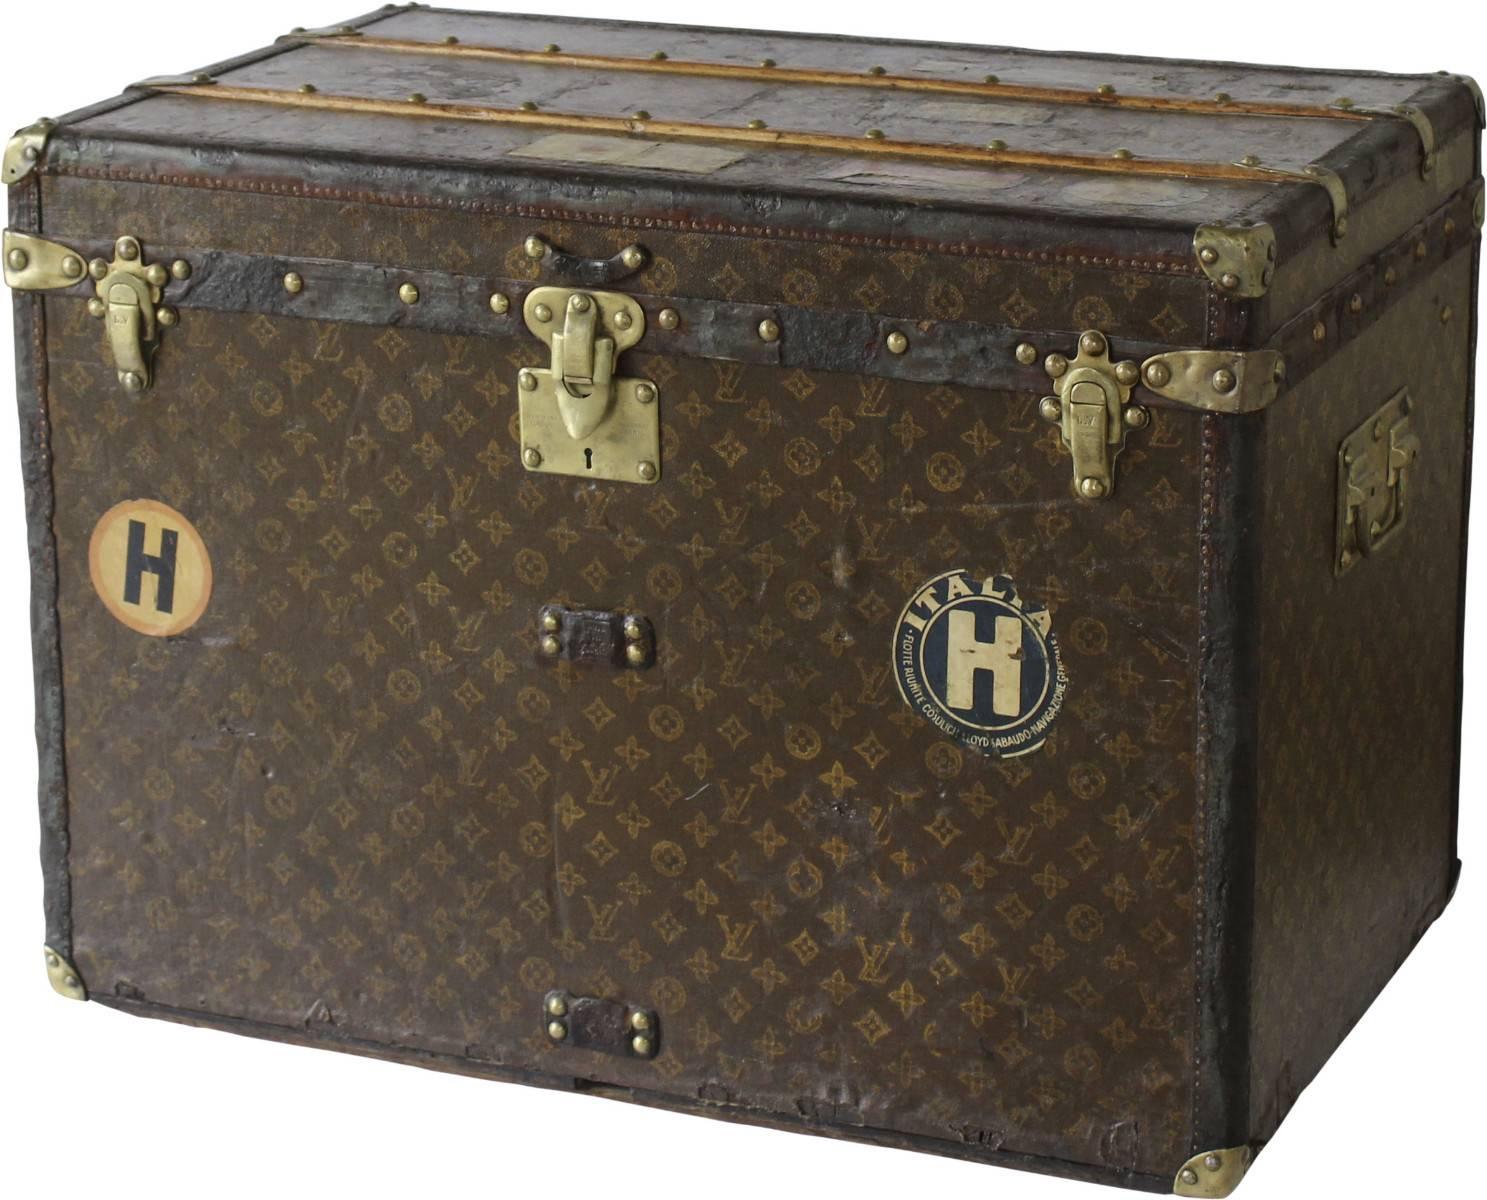 Small courier trunk with H Monogram on front,

circa 1930s in good condition, brass hardware.

Slight leather exterior damage but overall a beautiful piece.

Original quilting and trays internally.

Includes historical hotel stickers on